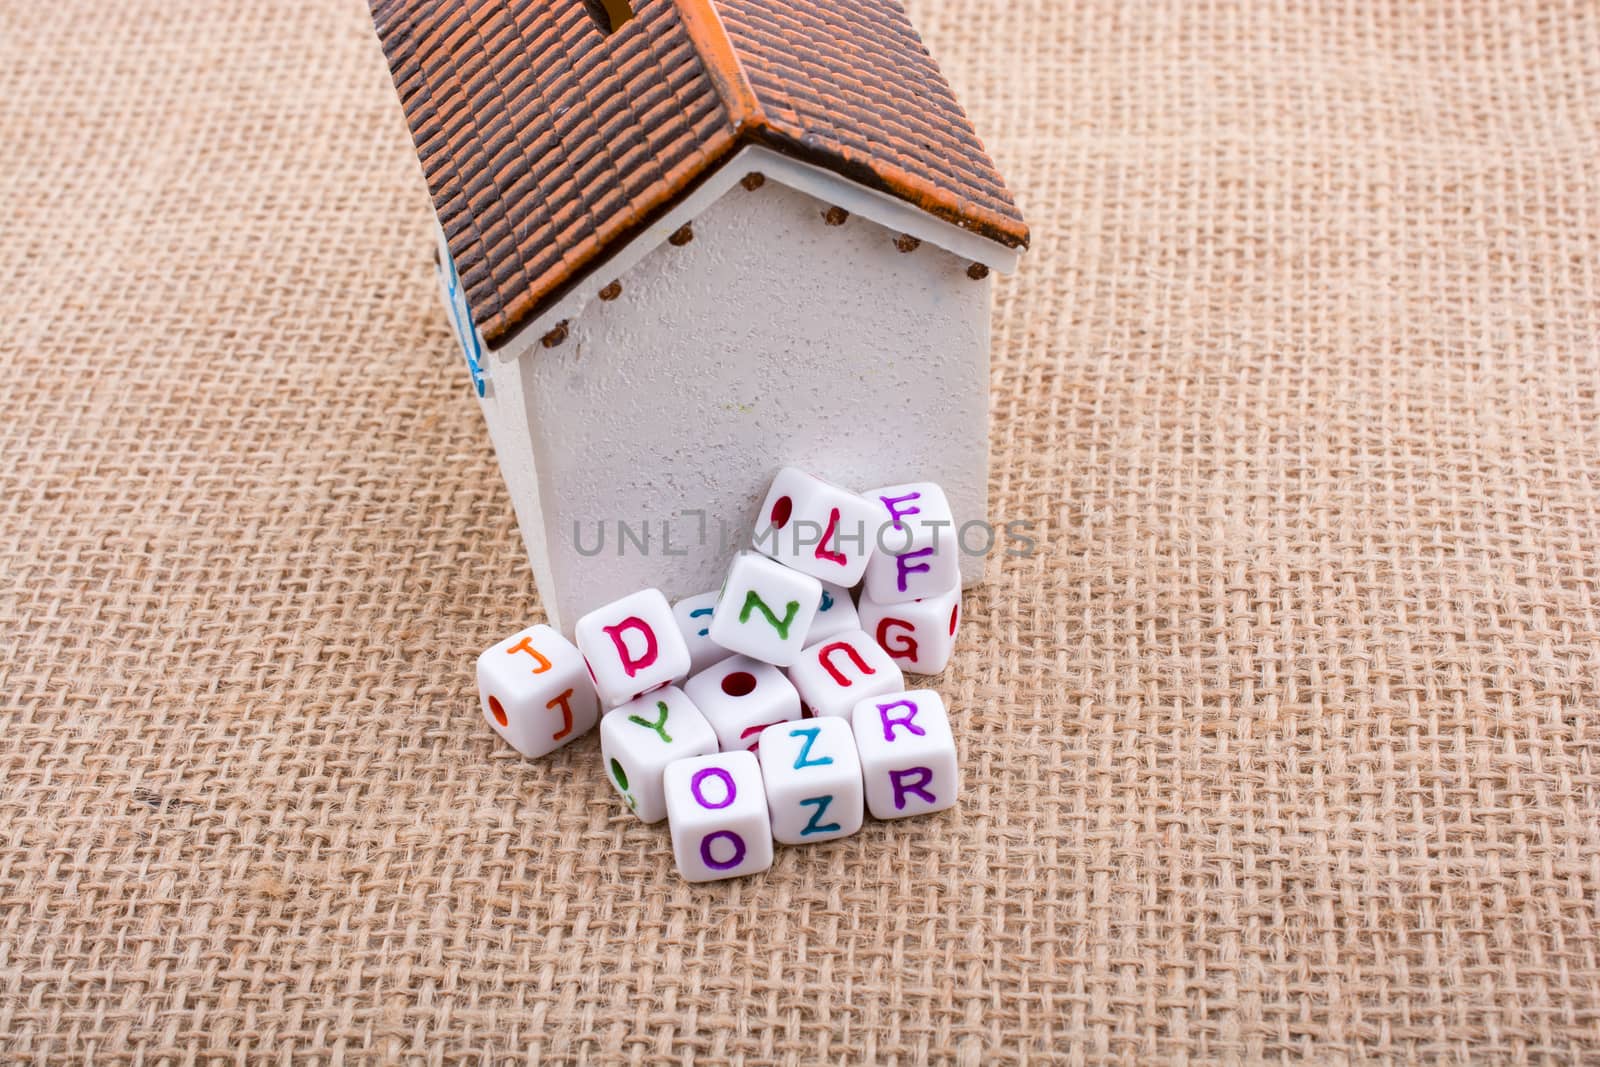 Leter cubes and little model house on a canvas